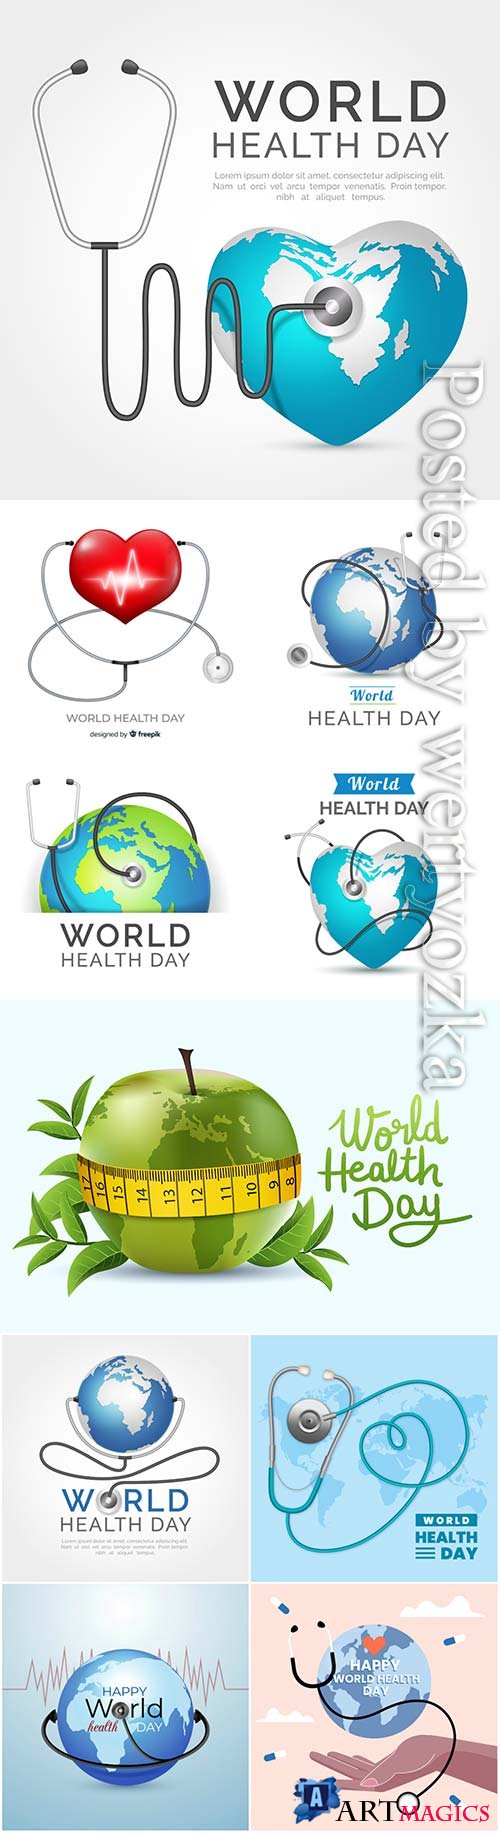 Realistic world health day vector background